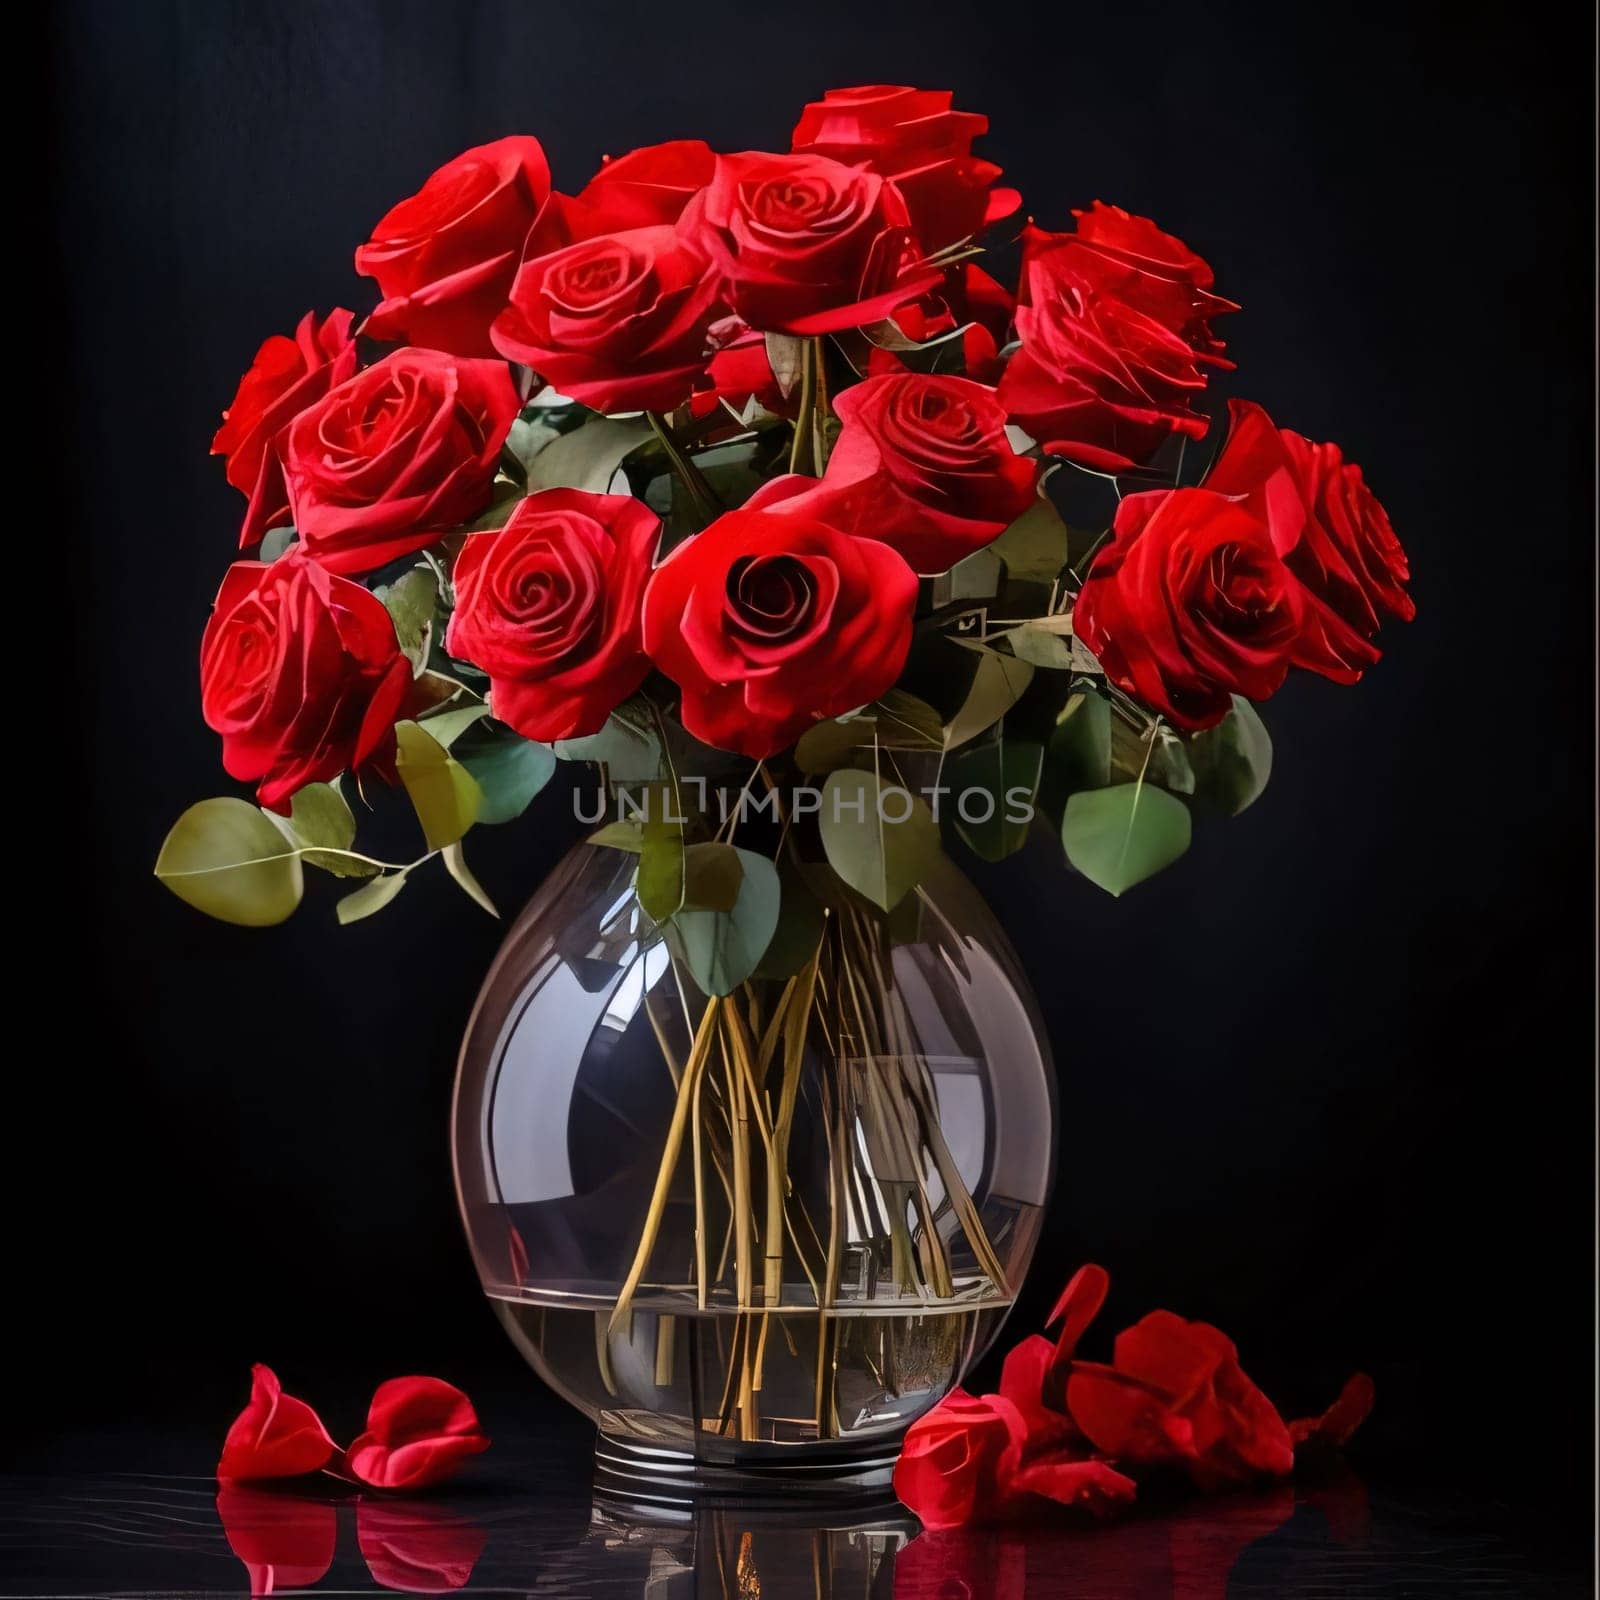 Bouquets of red roses with a red bow in a transparent vase, dark background. Flowering flowers, a symbol of spring, new life. A joyful time of nature waking up to life.